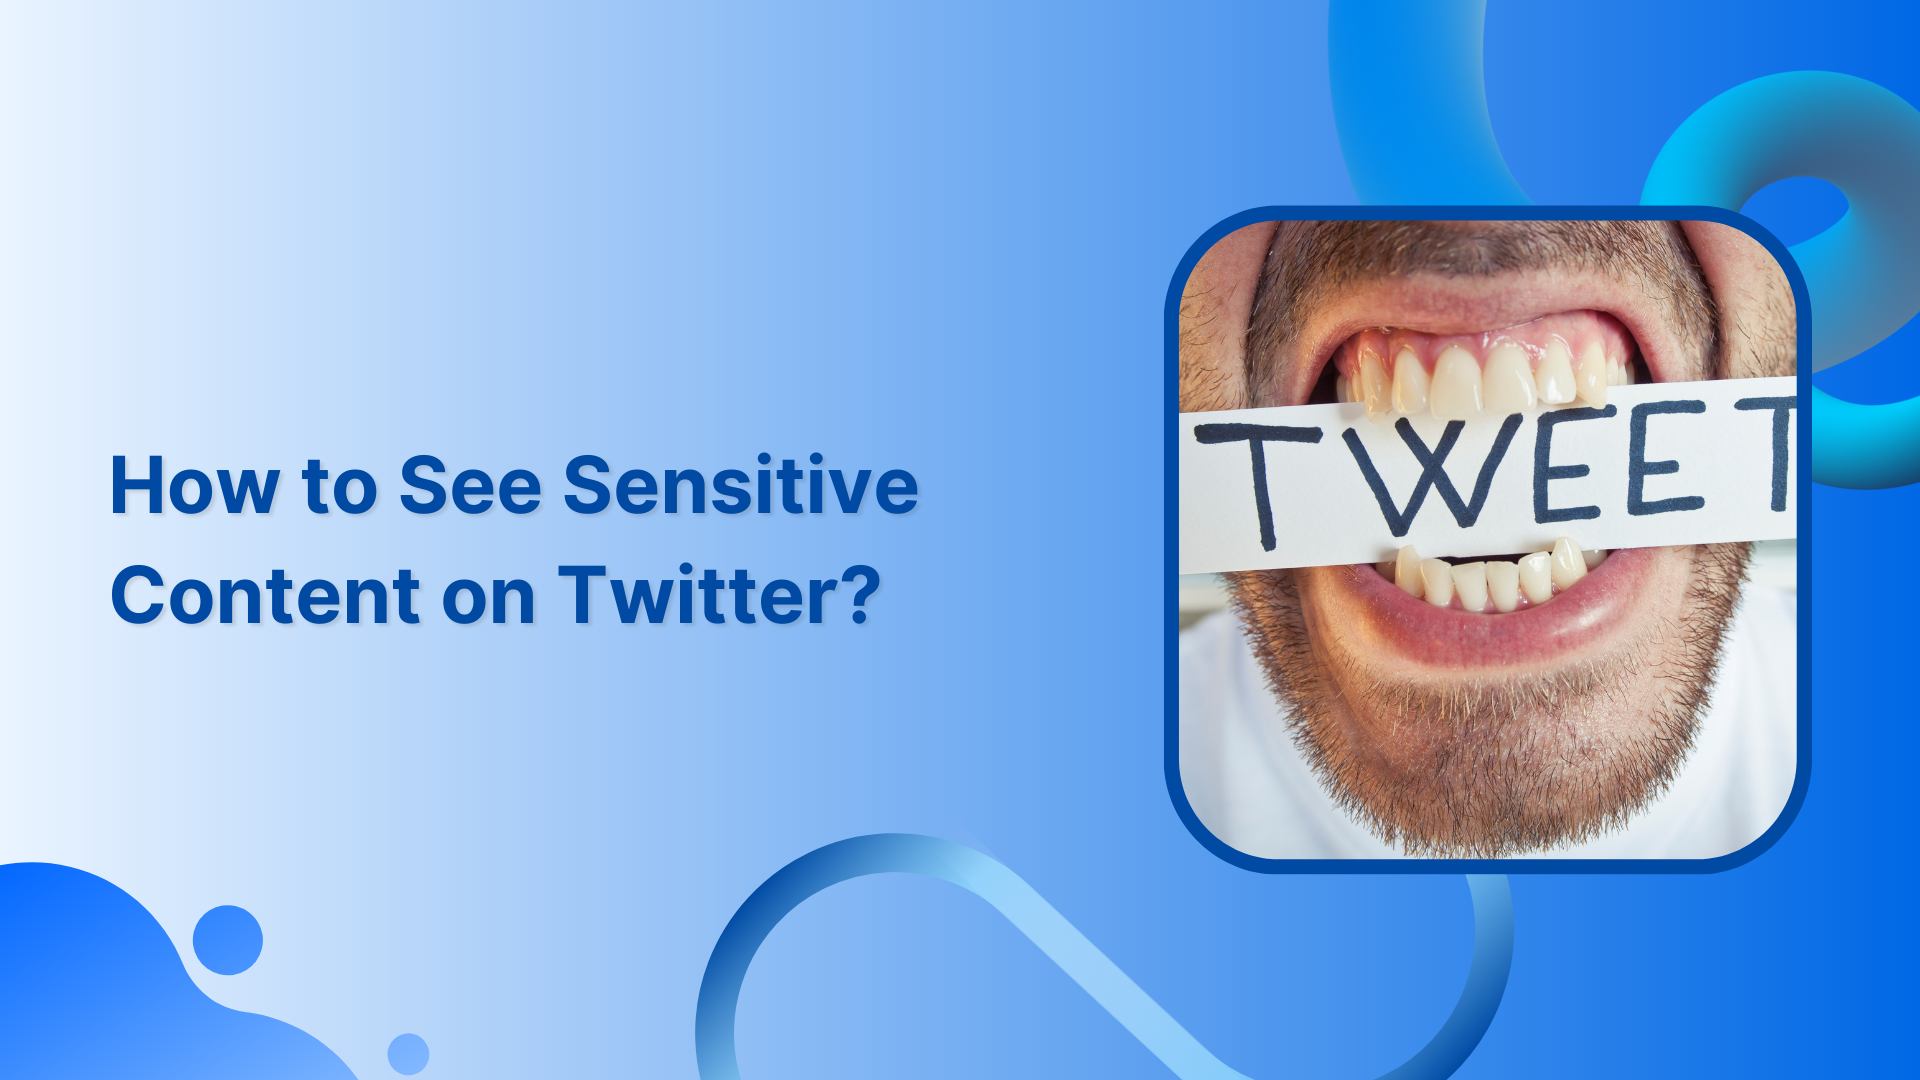 How to see sensitive content on Twitter